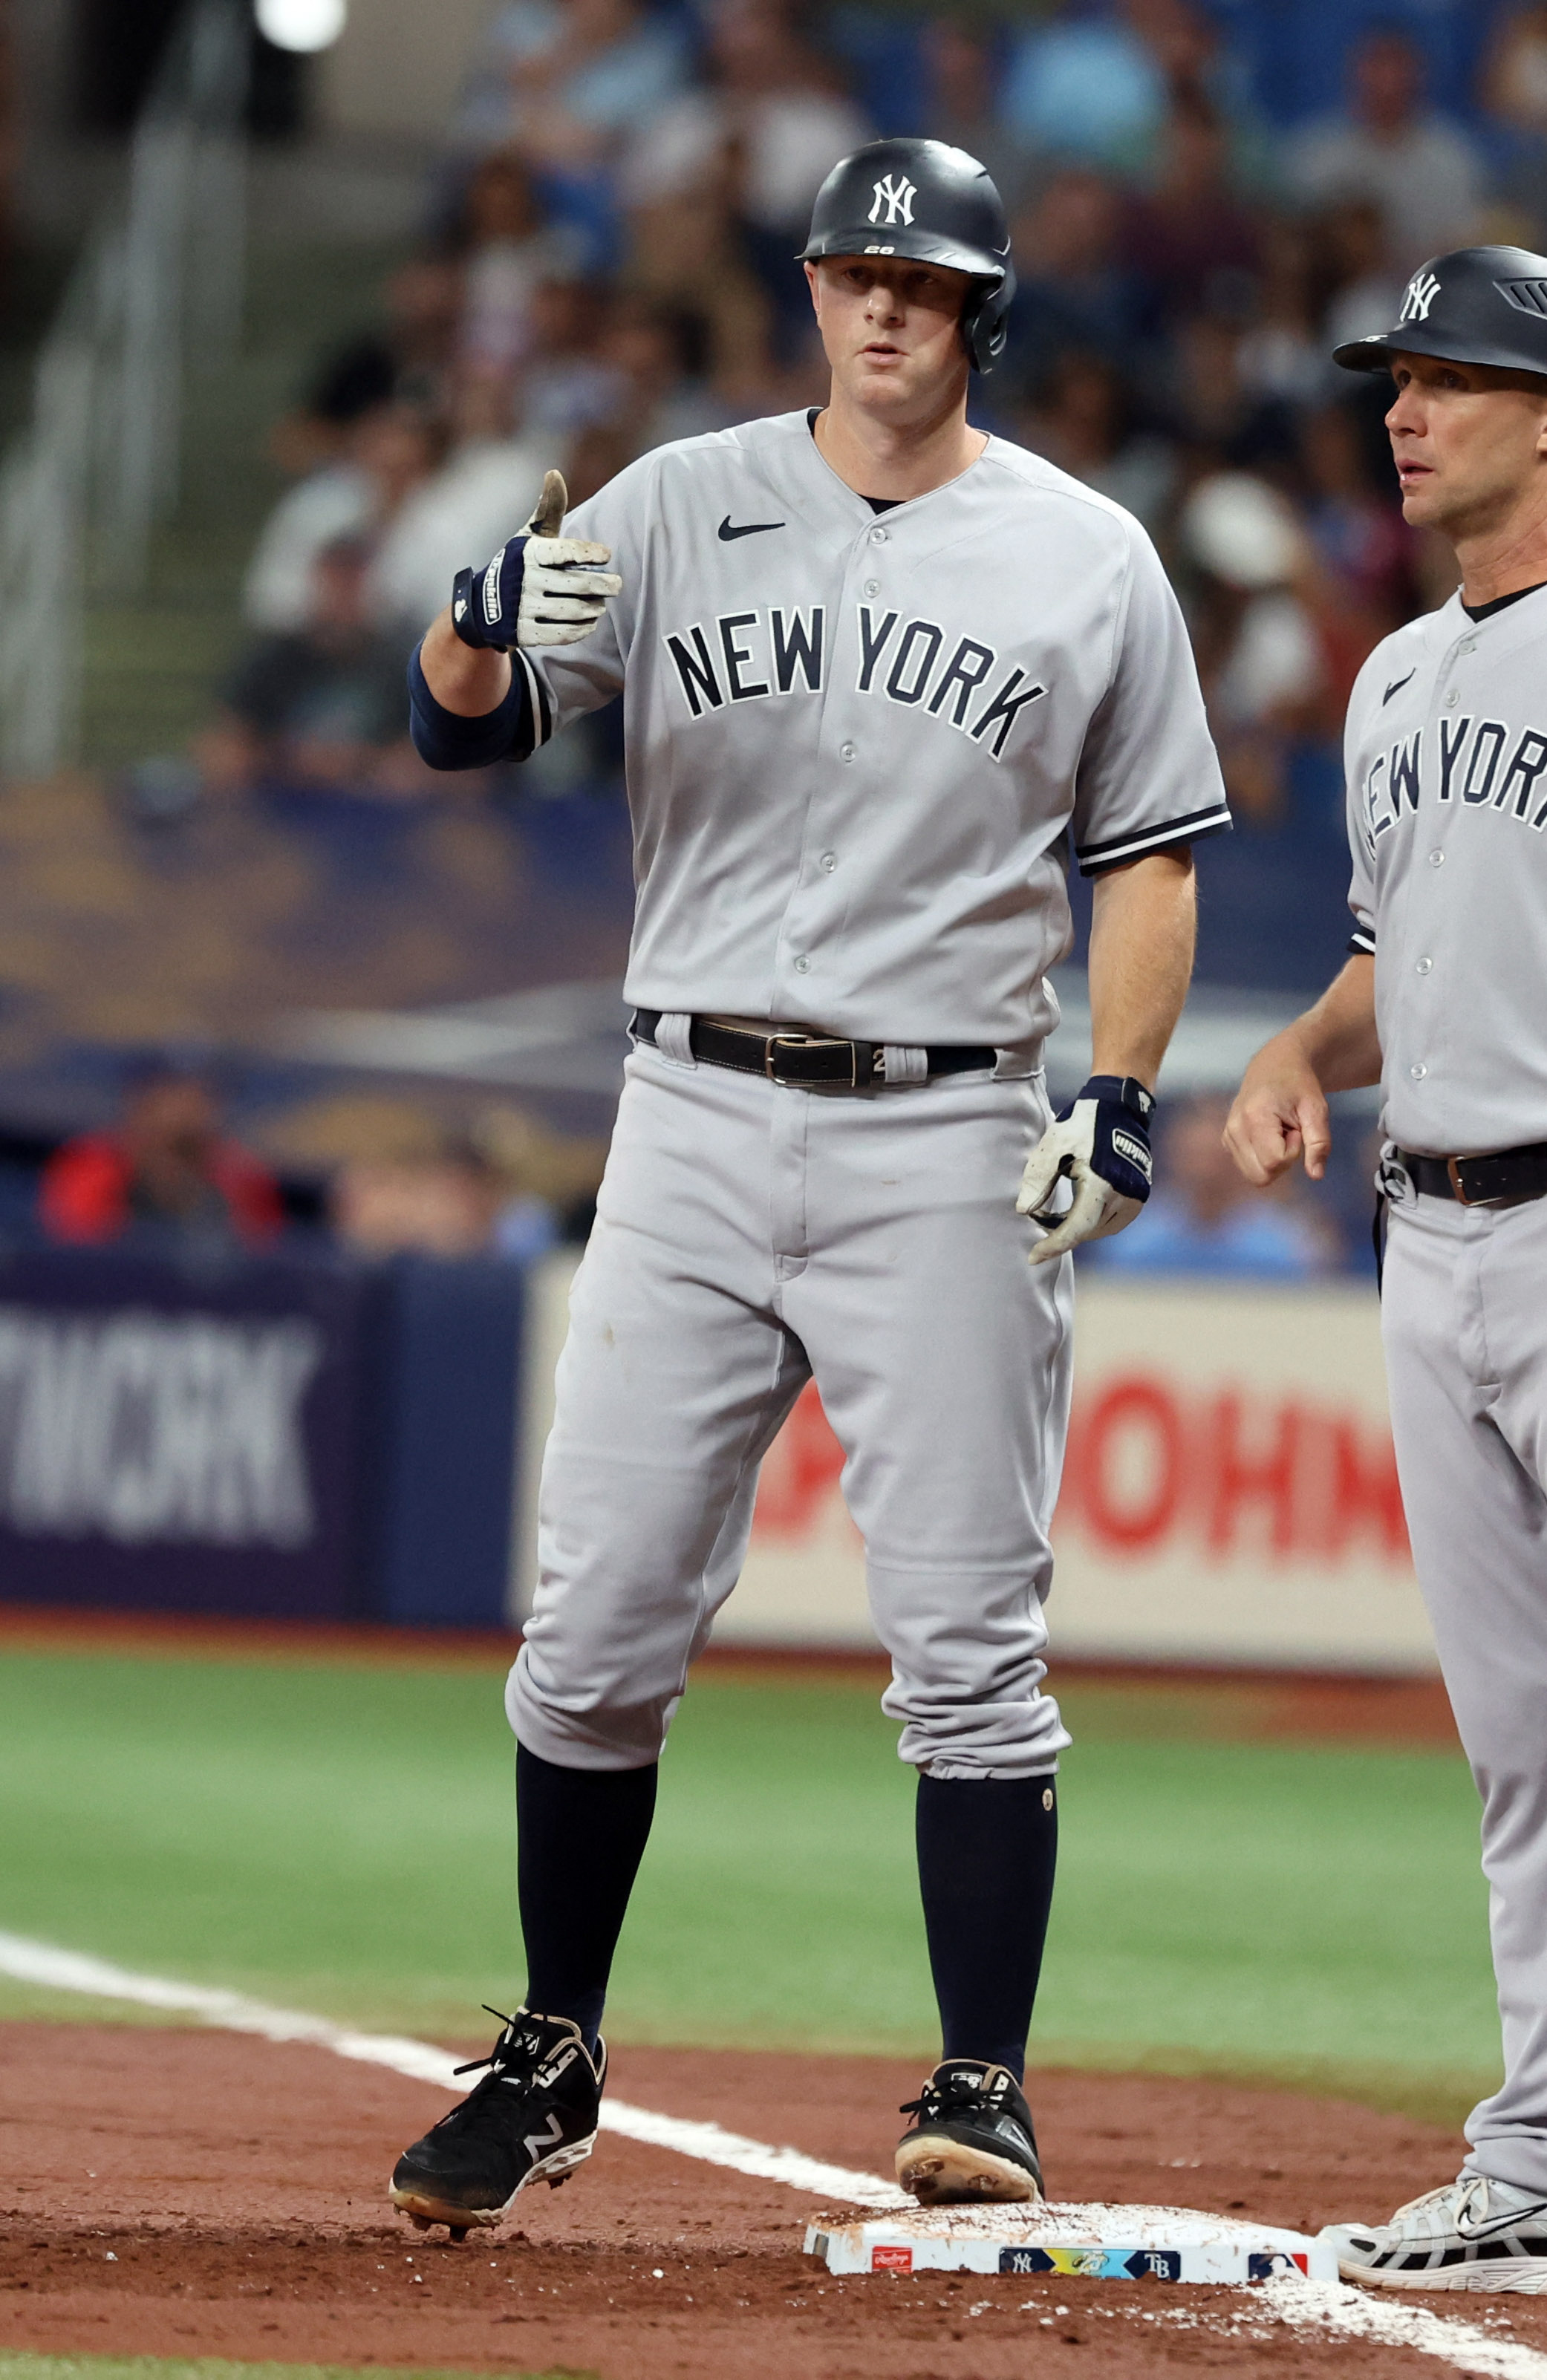 LeMahieu homers twice to back Cole and Yanks beat Rays 6-2 for 2nd win in  12 games